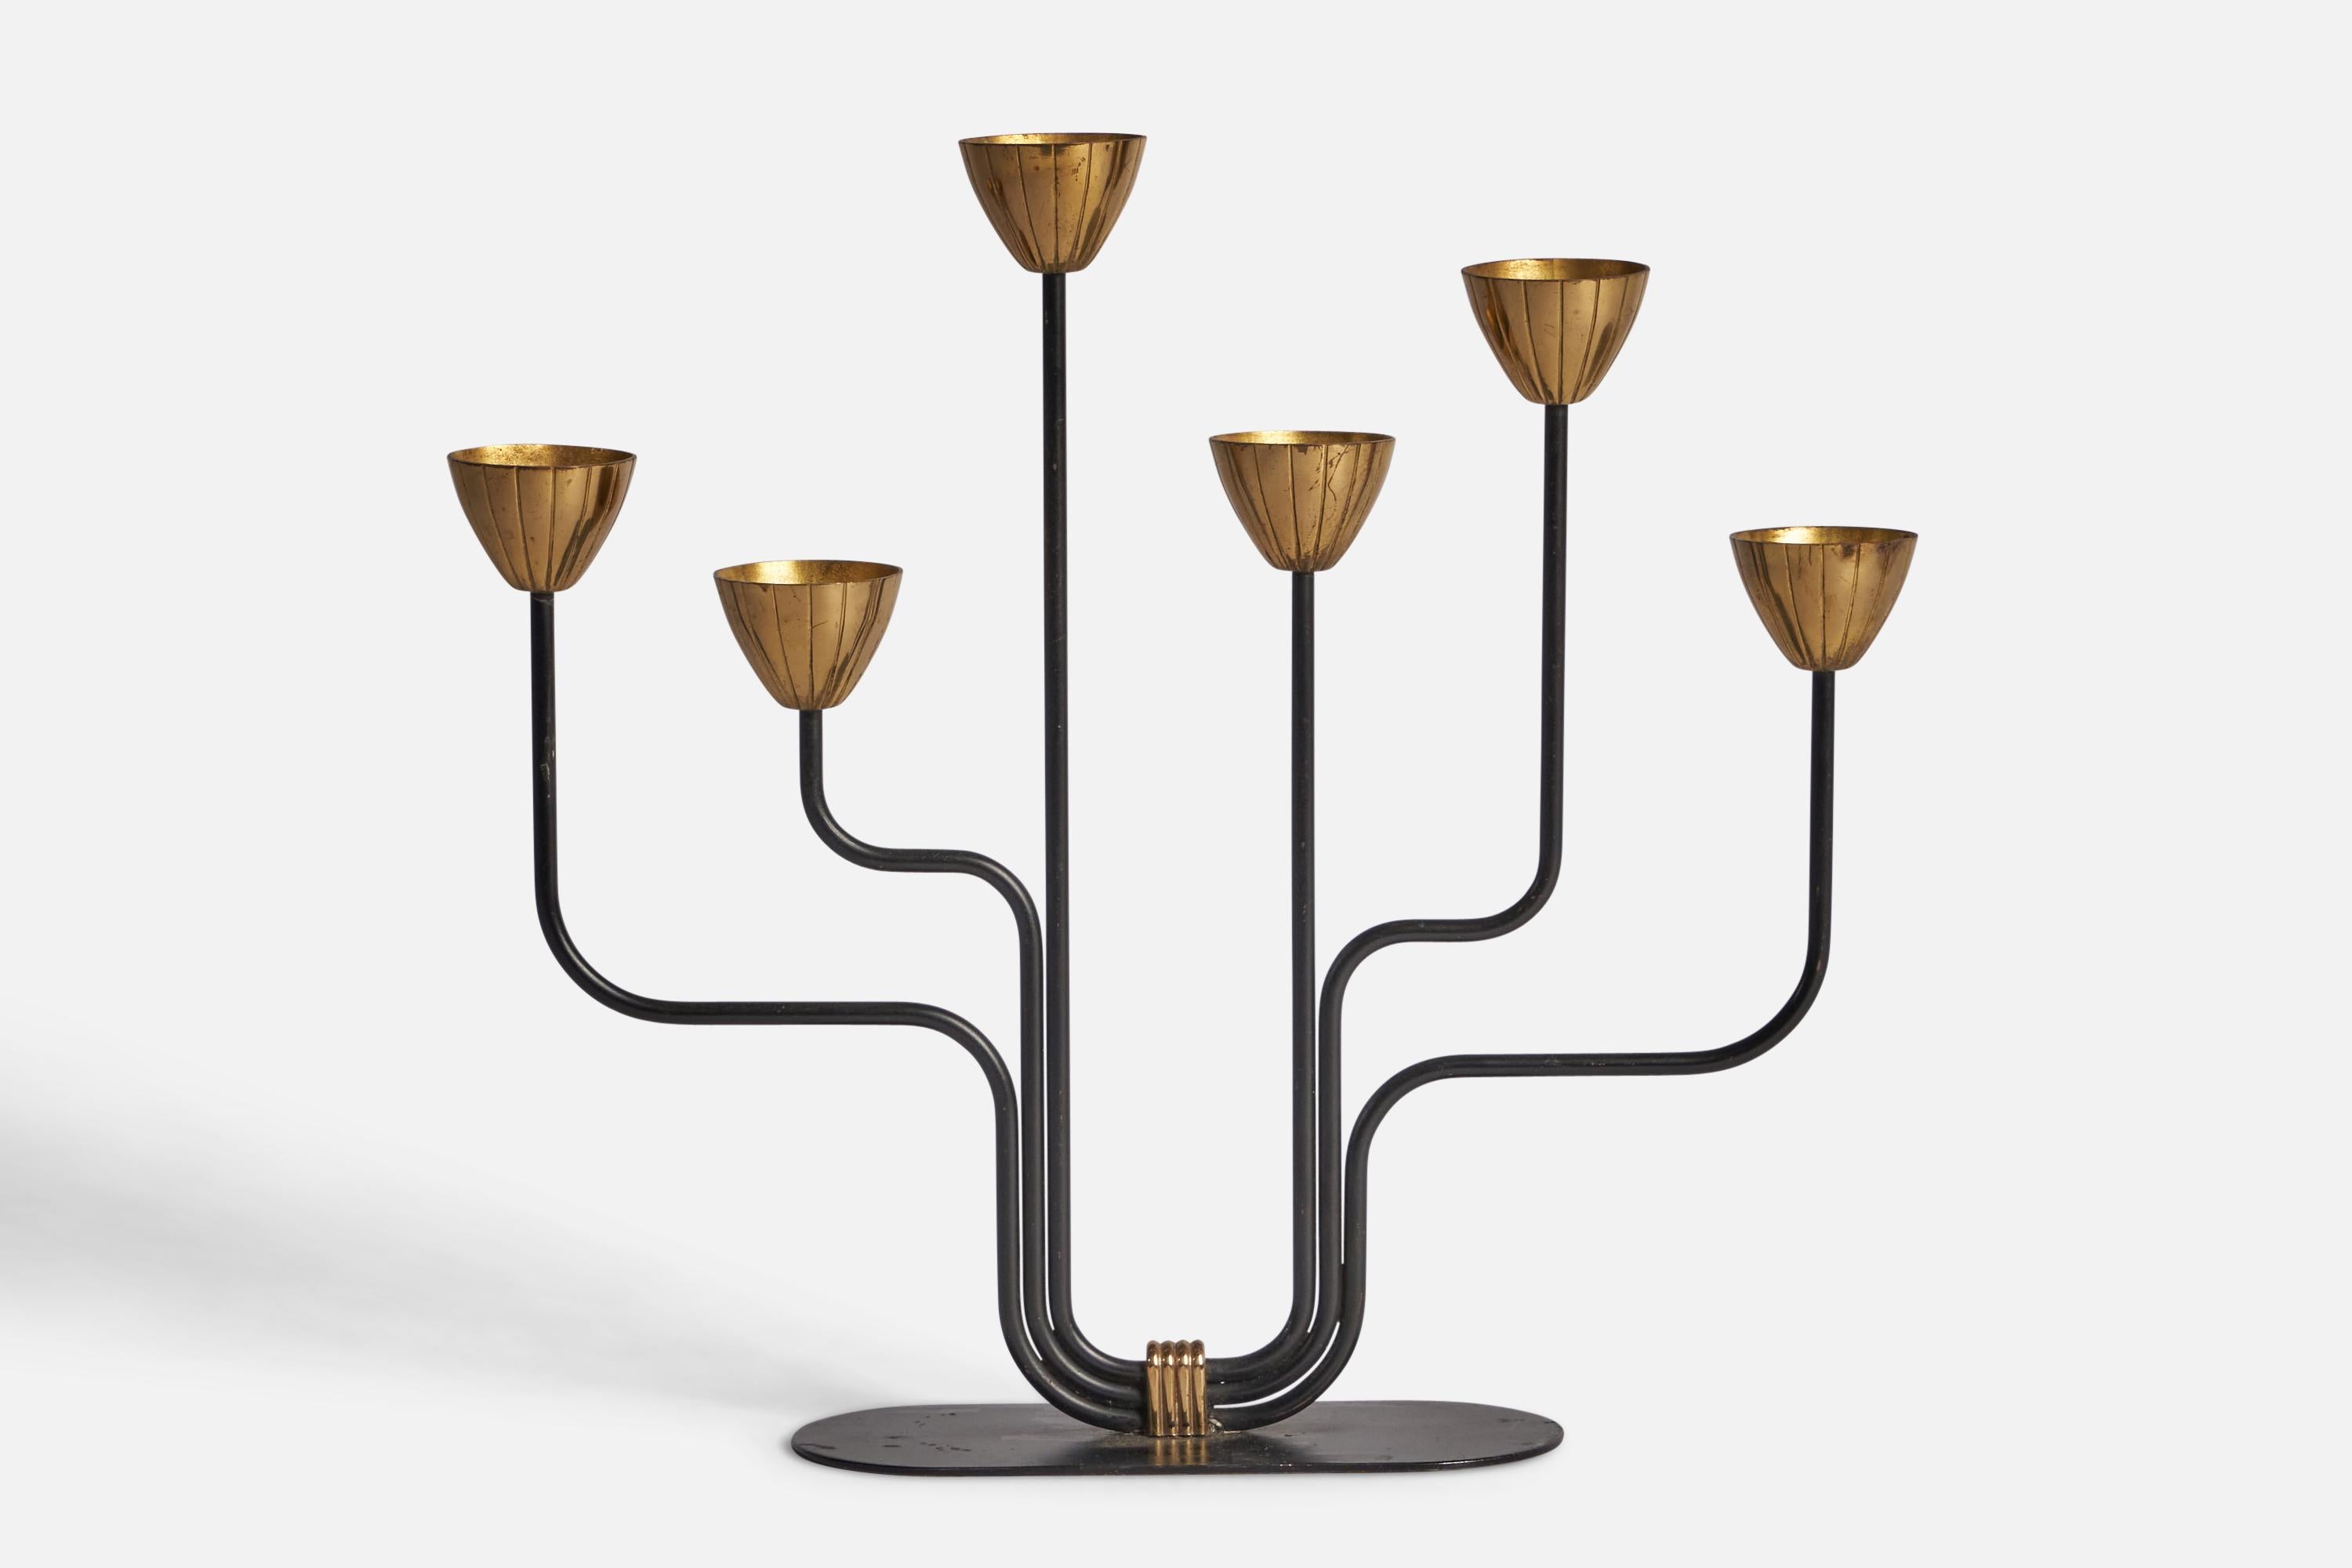 A brass and black-painted metal candelabra designed by Gunnar Ander and Produced by Ystad-Metall, Sweden, c. 1940s.

Holds 0.53” x 0.4” diameter candles